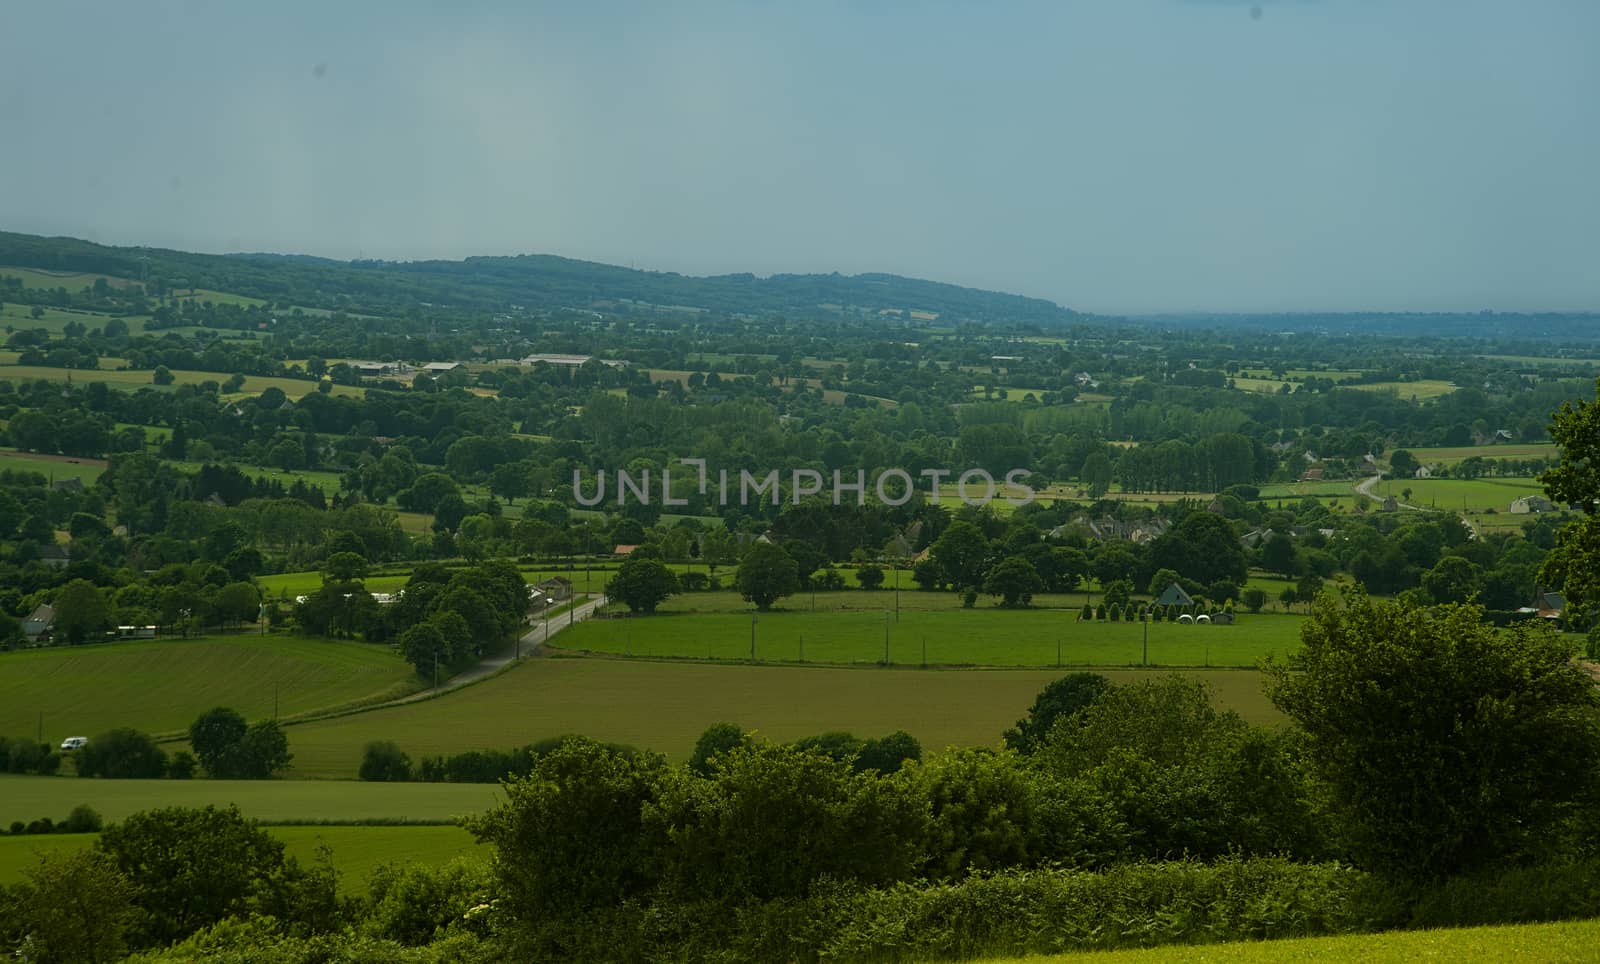 View from the hill on landscape in rural Normandy and storm forming in the distance by sheriffkule